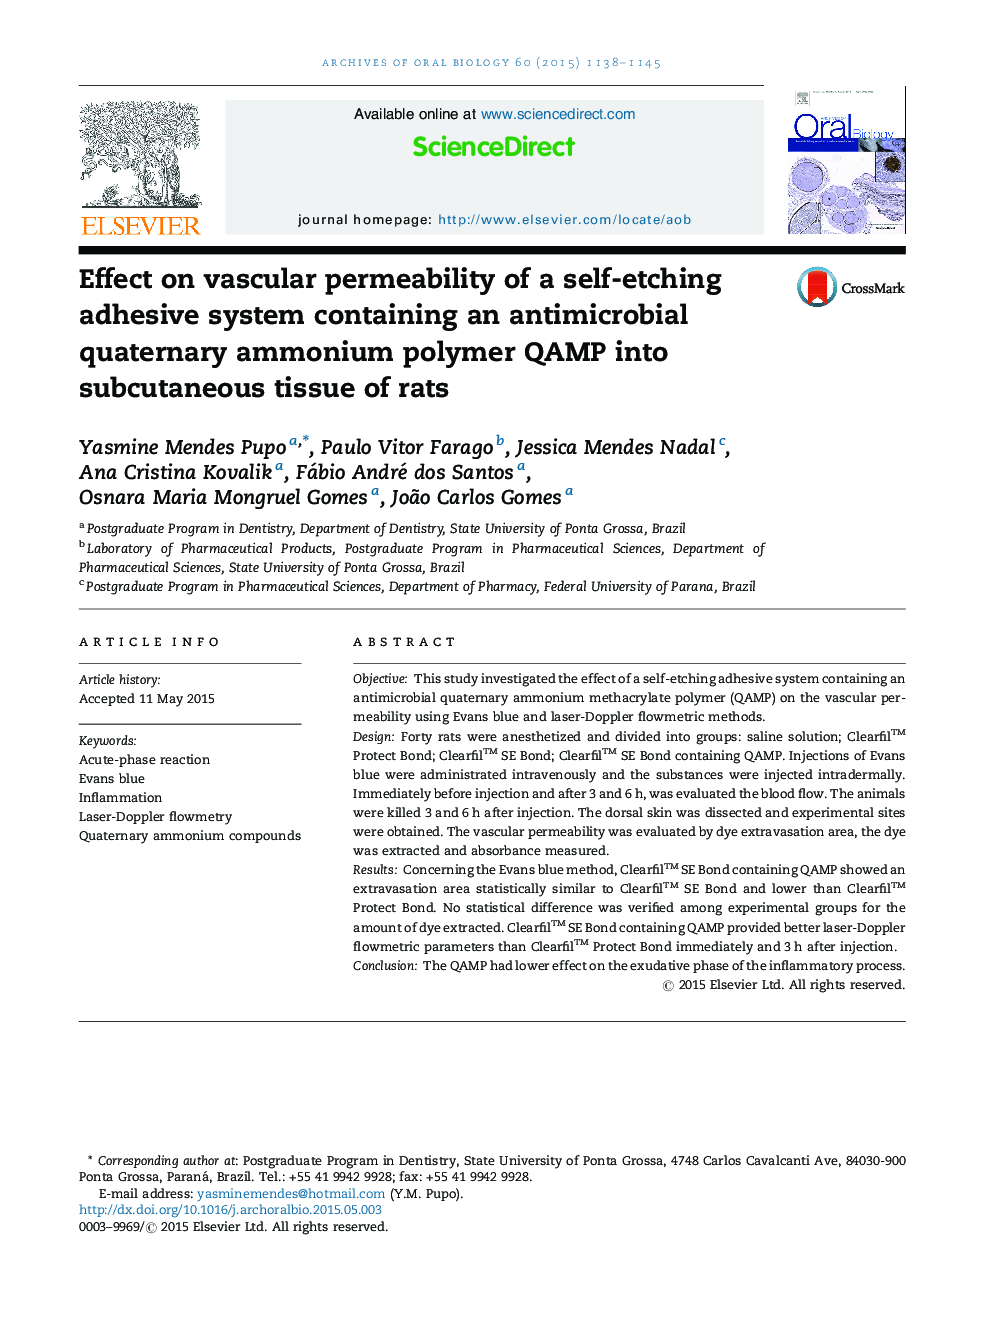 Effect on vascular permeability of a self-etching adhesive system containing an antimicrobial quaternary ammonium polymer QAMP into subcutaneous tissue of rats